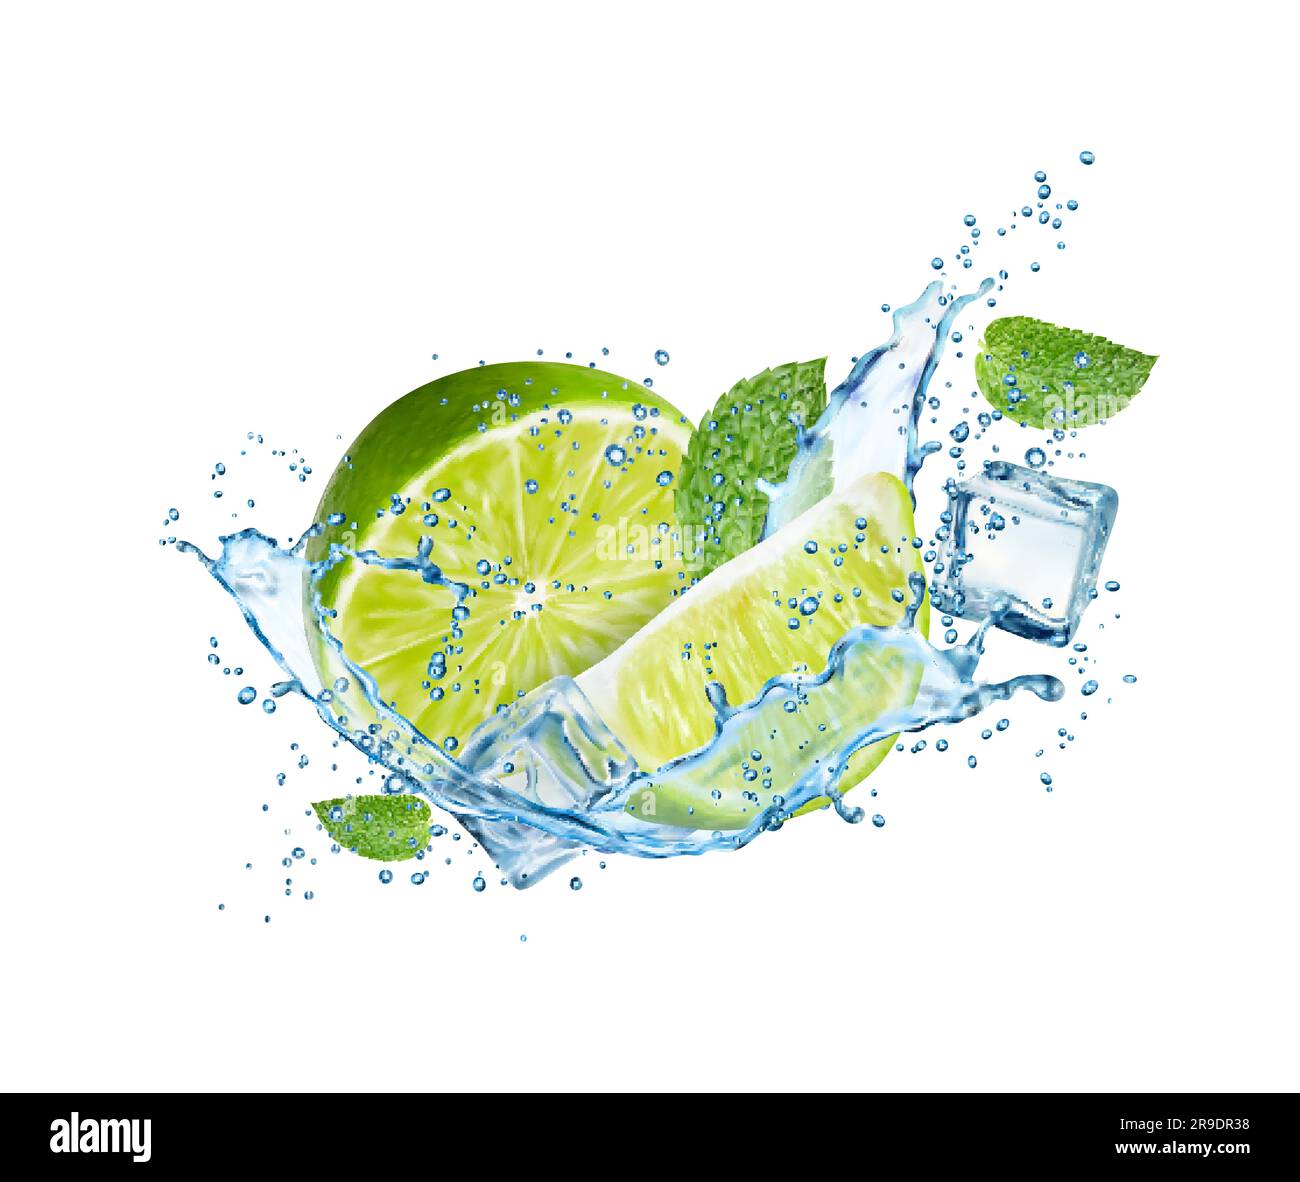 https://c8.alamy.com/comp/2R9DR38/realistic-mojito-drink-lime-fruit-mint-leaves-ice-cubes-and-splash-3d-vector-beverage-explosion-with-citrus-slices-water-drops-peppermint-and-frozen-icy-blocks-liquid-cocktail-or-cold-tea-flow-2R9DR38.jpg